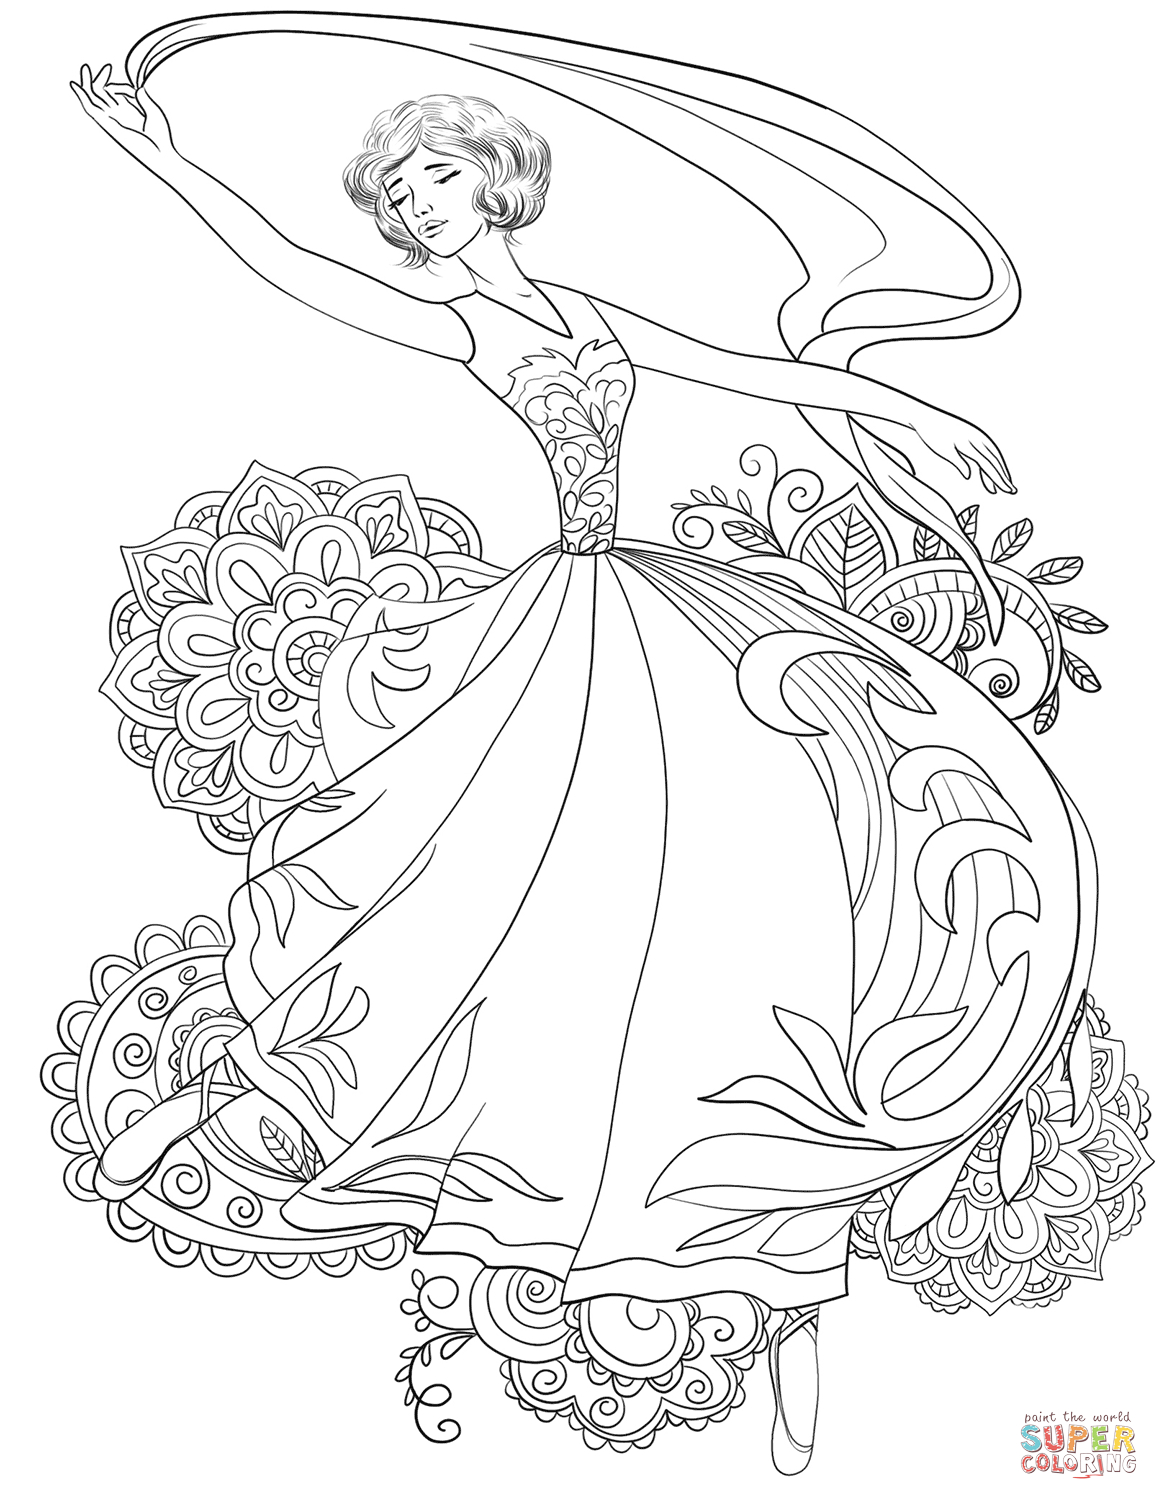 Dancing Coloring Page Woman Dancing With Shawl Coloring Page Free Printable Coloring Pages